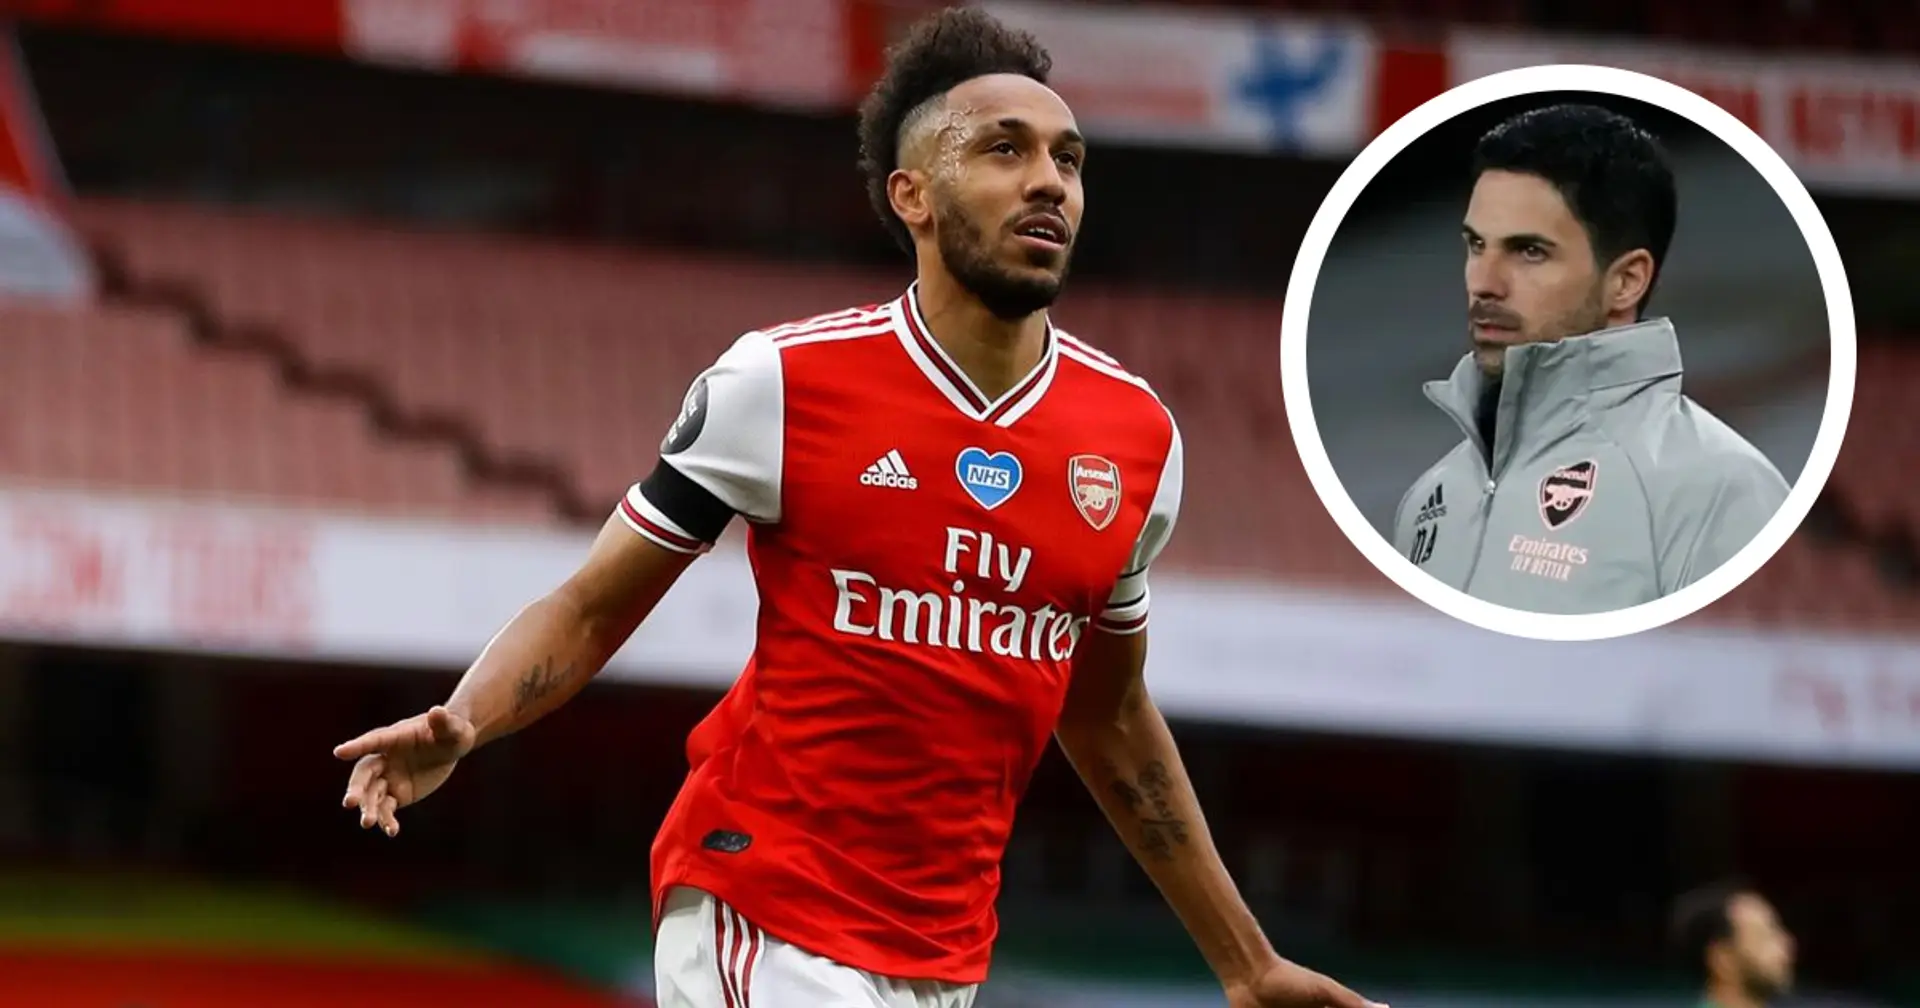 Mikel Arteta provides update on Aubameyang after striker contracts malaria